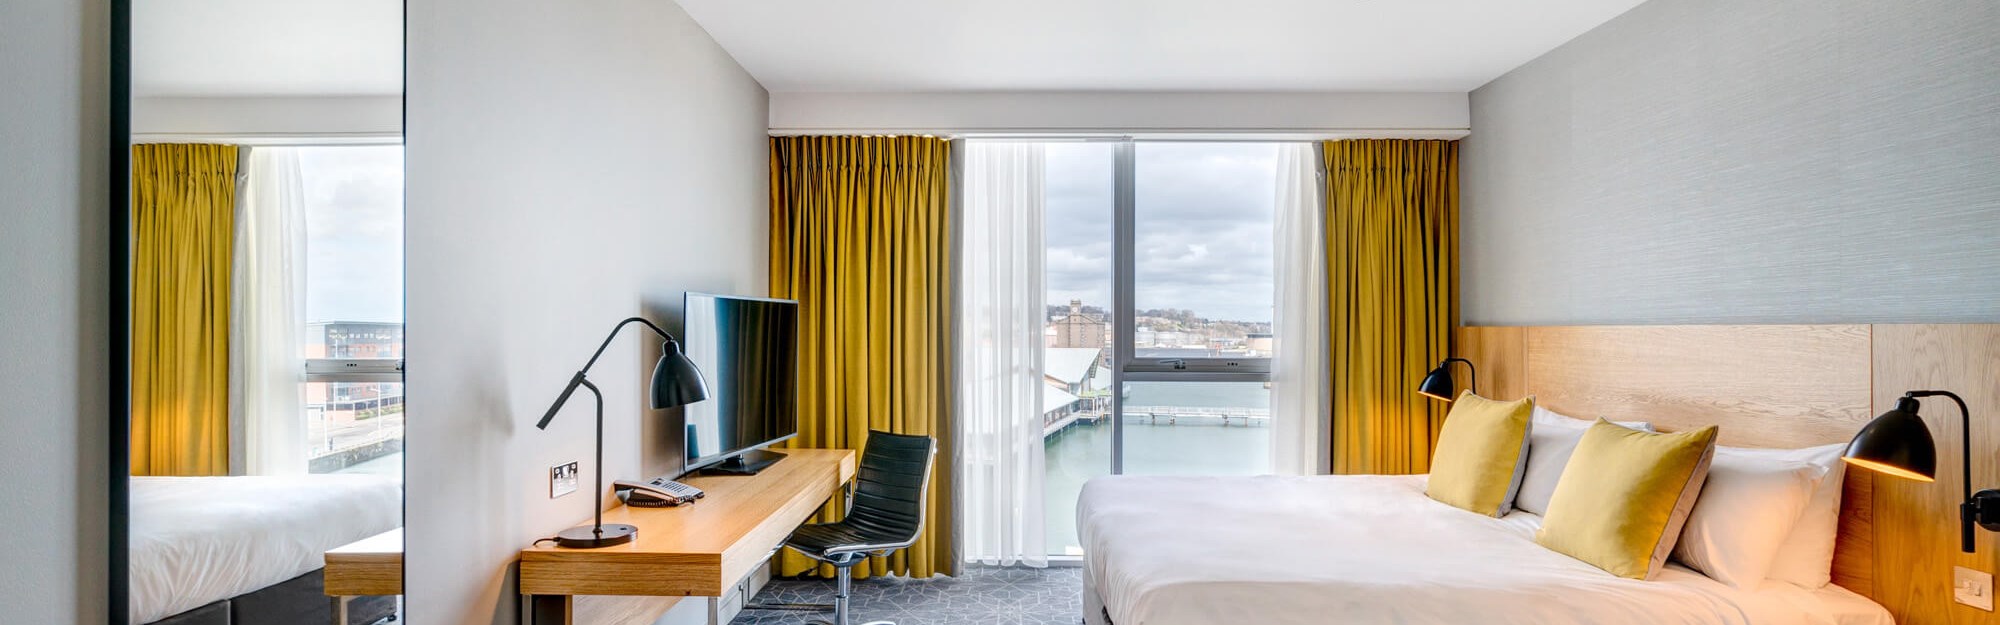 King size bed, desk and views looking out to the city quay